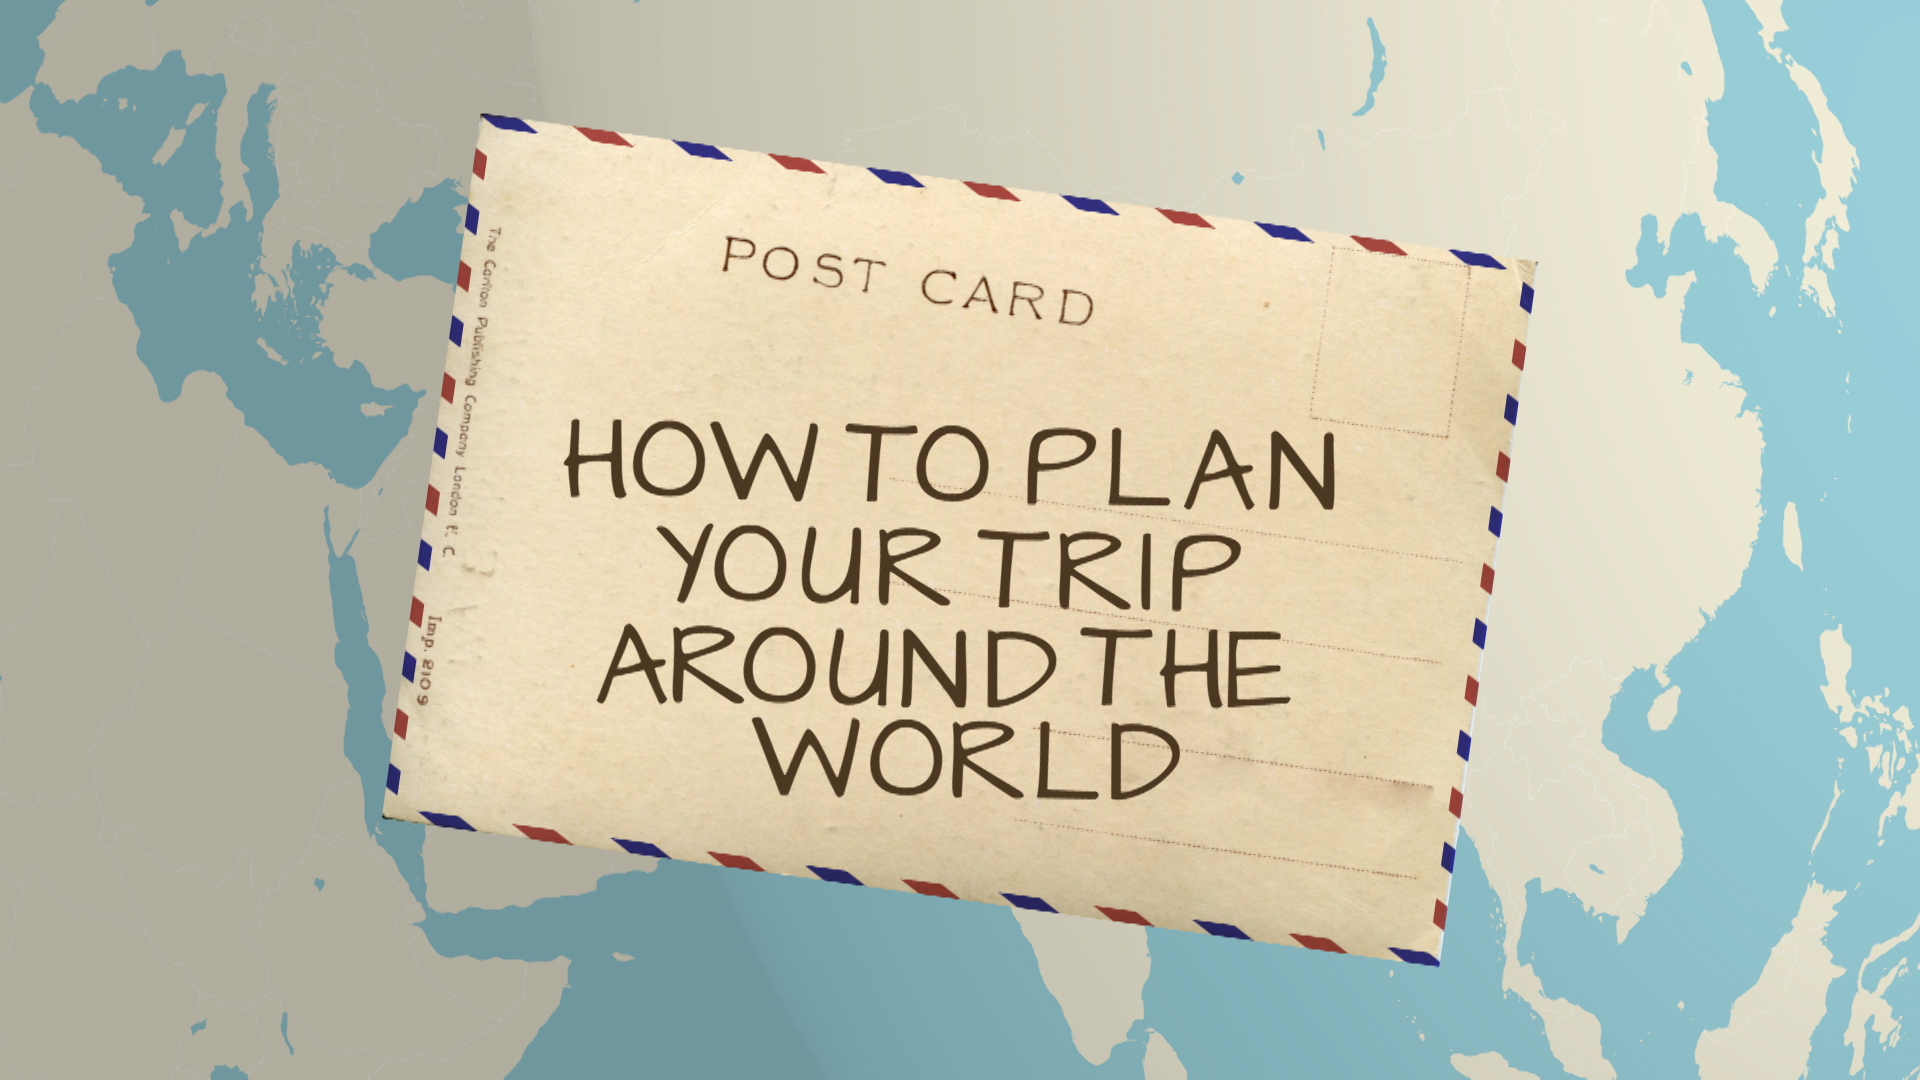 HOW TO PLAN A TRIP